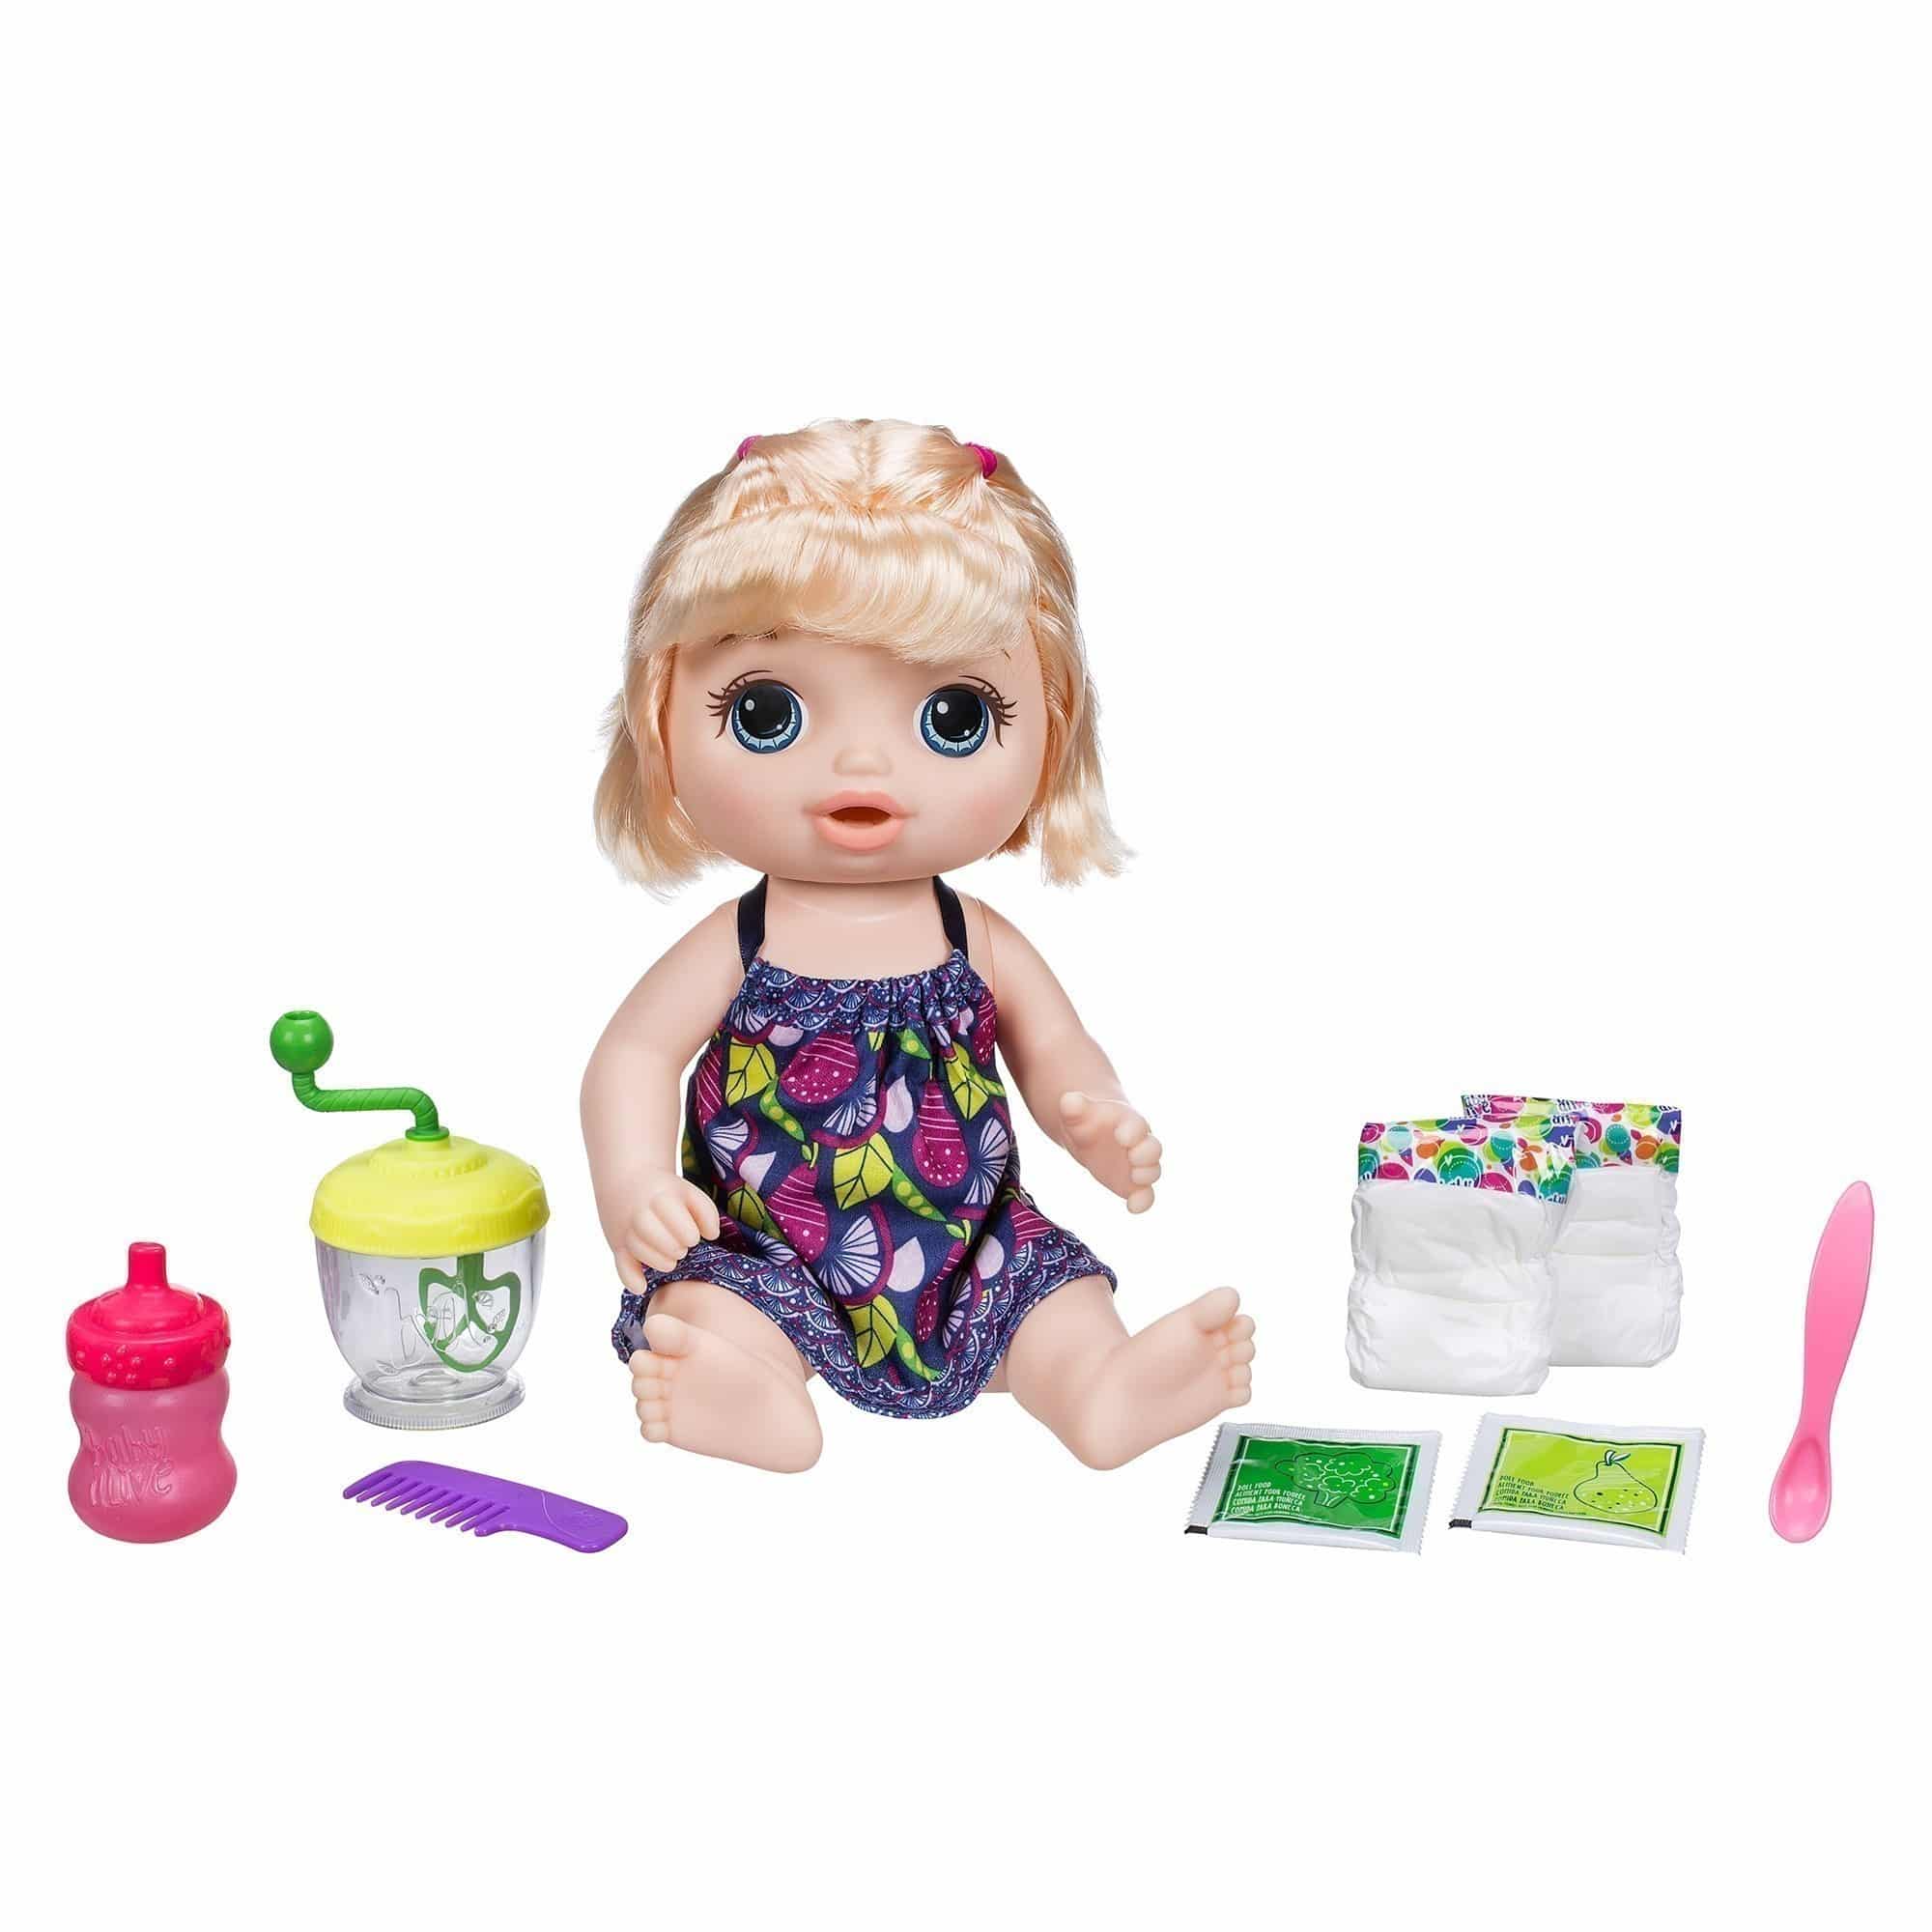 Baby Alive - Sweet Spoonfuls Baby Doll Girl